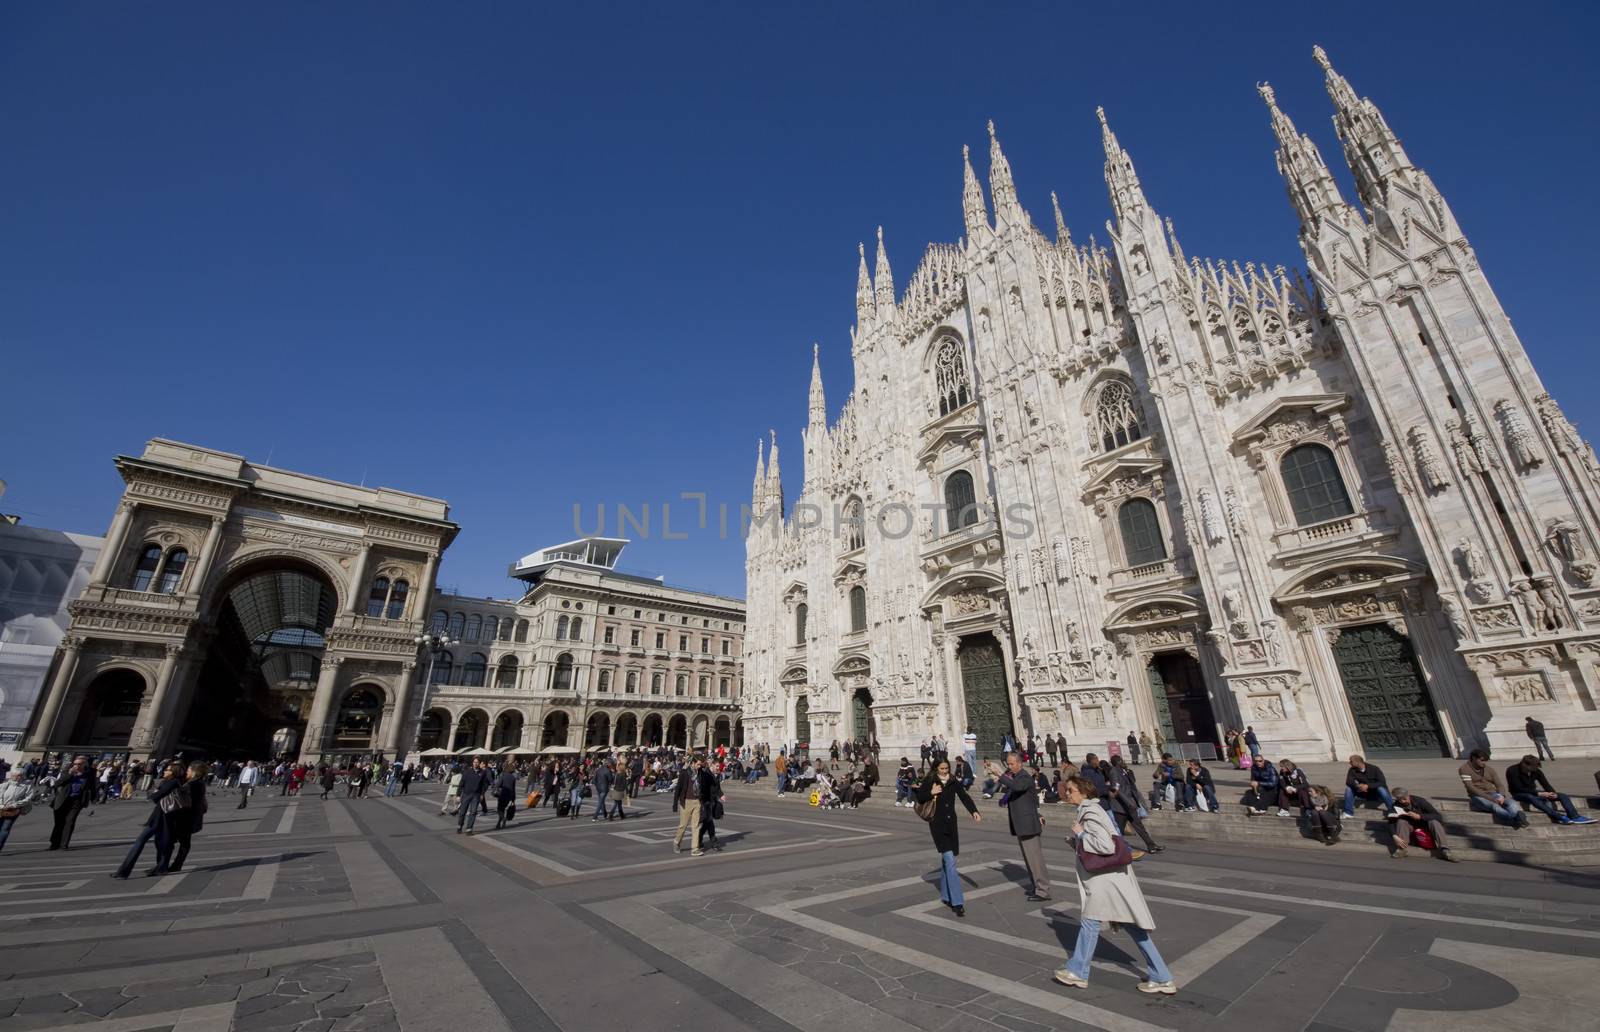 Milan, Italy - March 2013: Tourists at Piazza Duomo in Milan, famous city of Italy. From 2006, Milan was the 42nd most visited city worldwide, with 1.9 million annual international visitors.